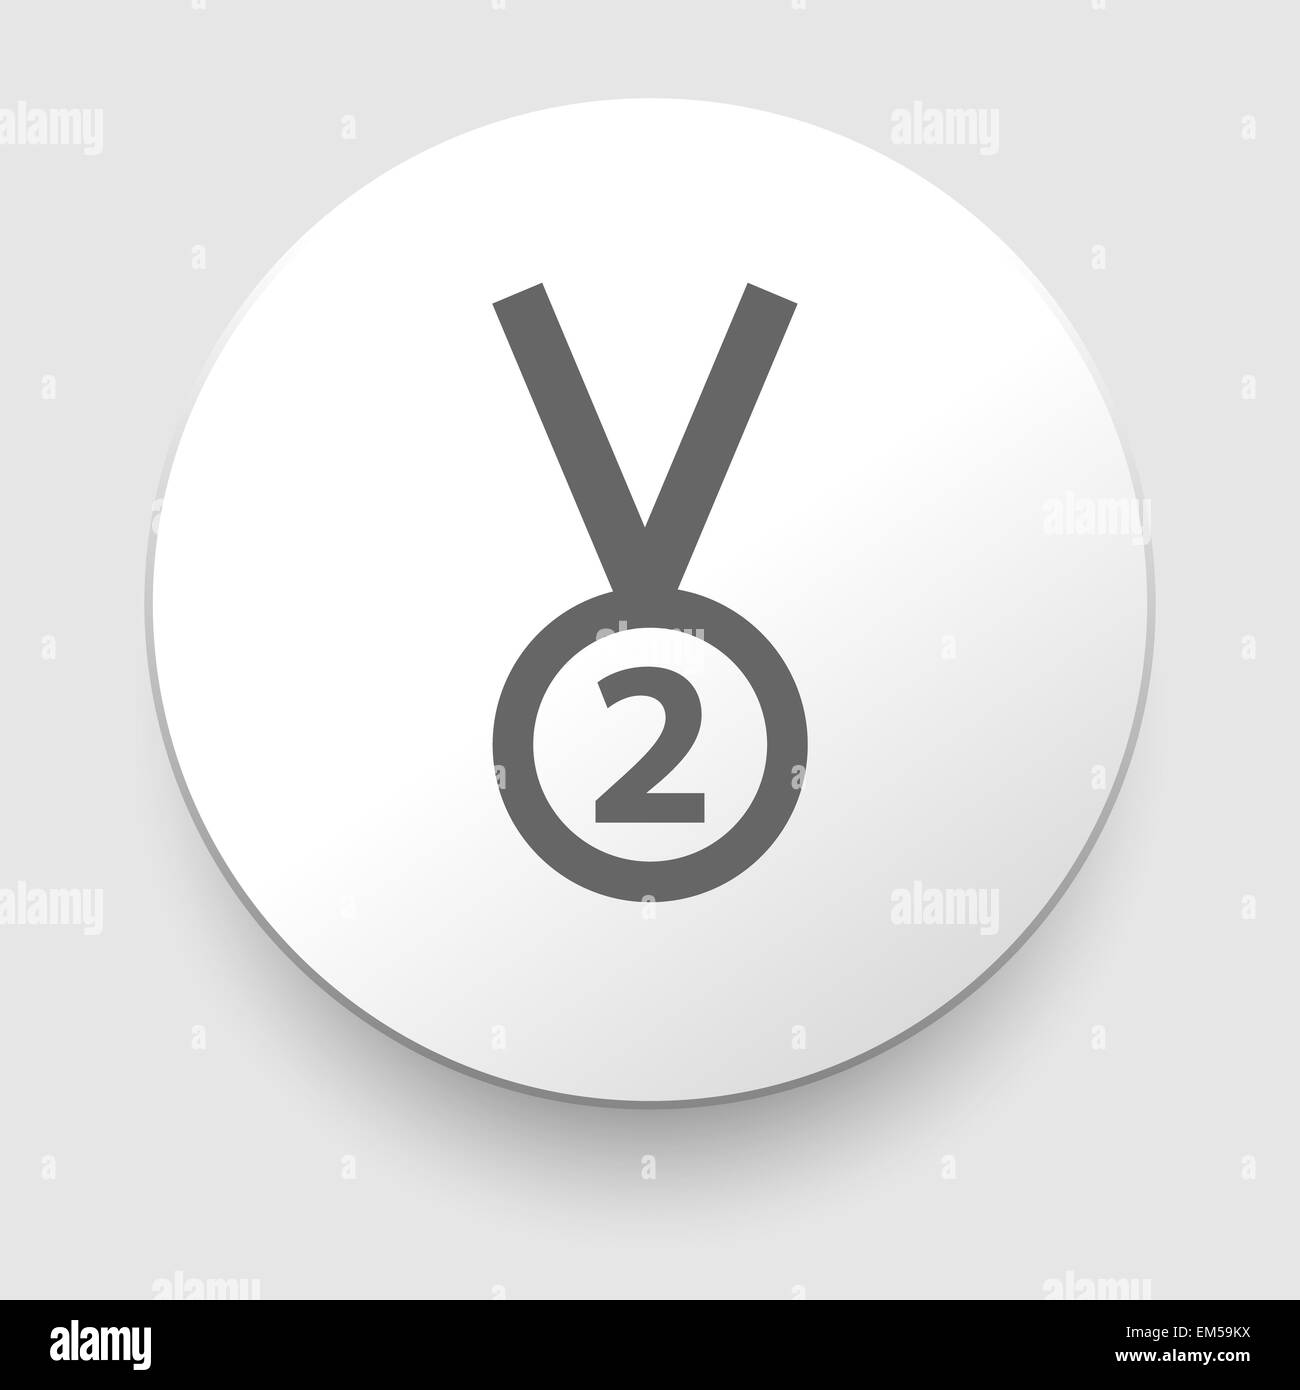 Second place trophy medal - vector Stock Photo